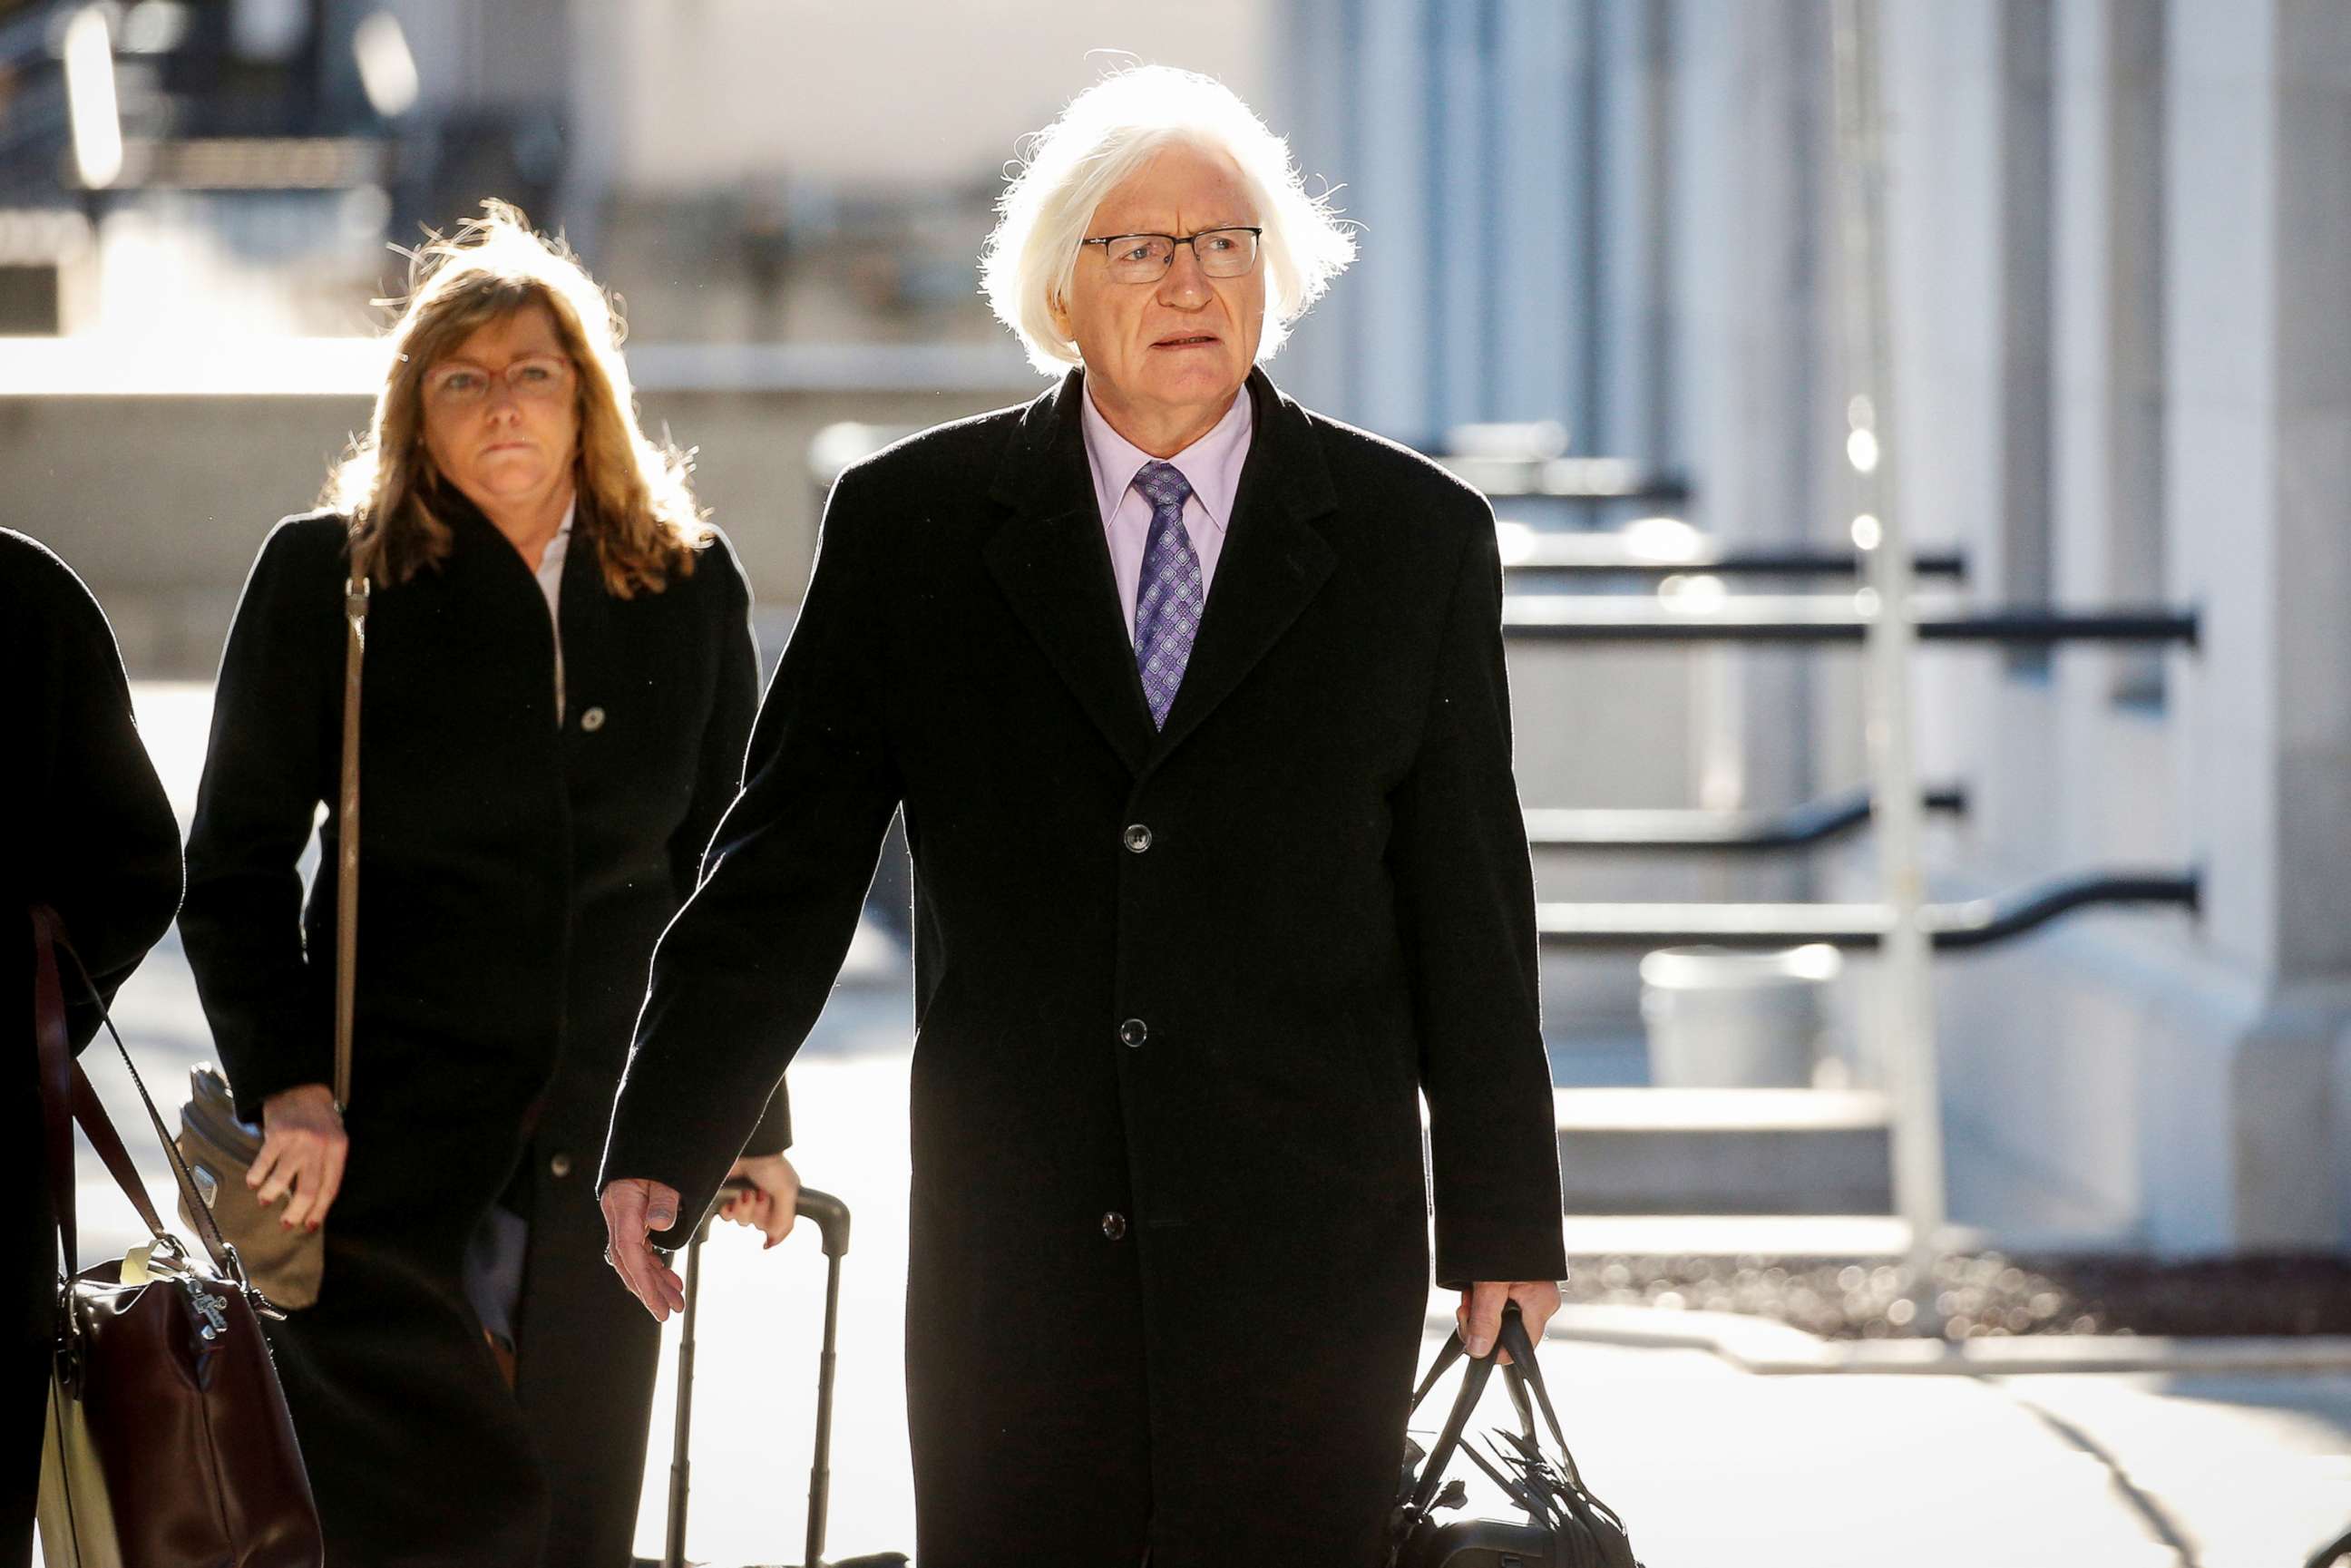 PHOTO: Bill Cosby's lawyer Tom Mesereau arrives for a pretrial hearing for Cosby's sexual assault trial at the Montgomery County Courthouse in Norristown, Pa., on March 5, 2018. 